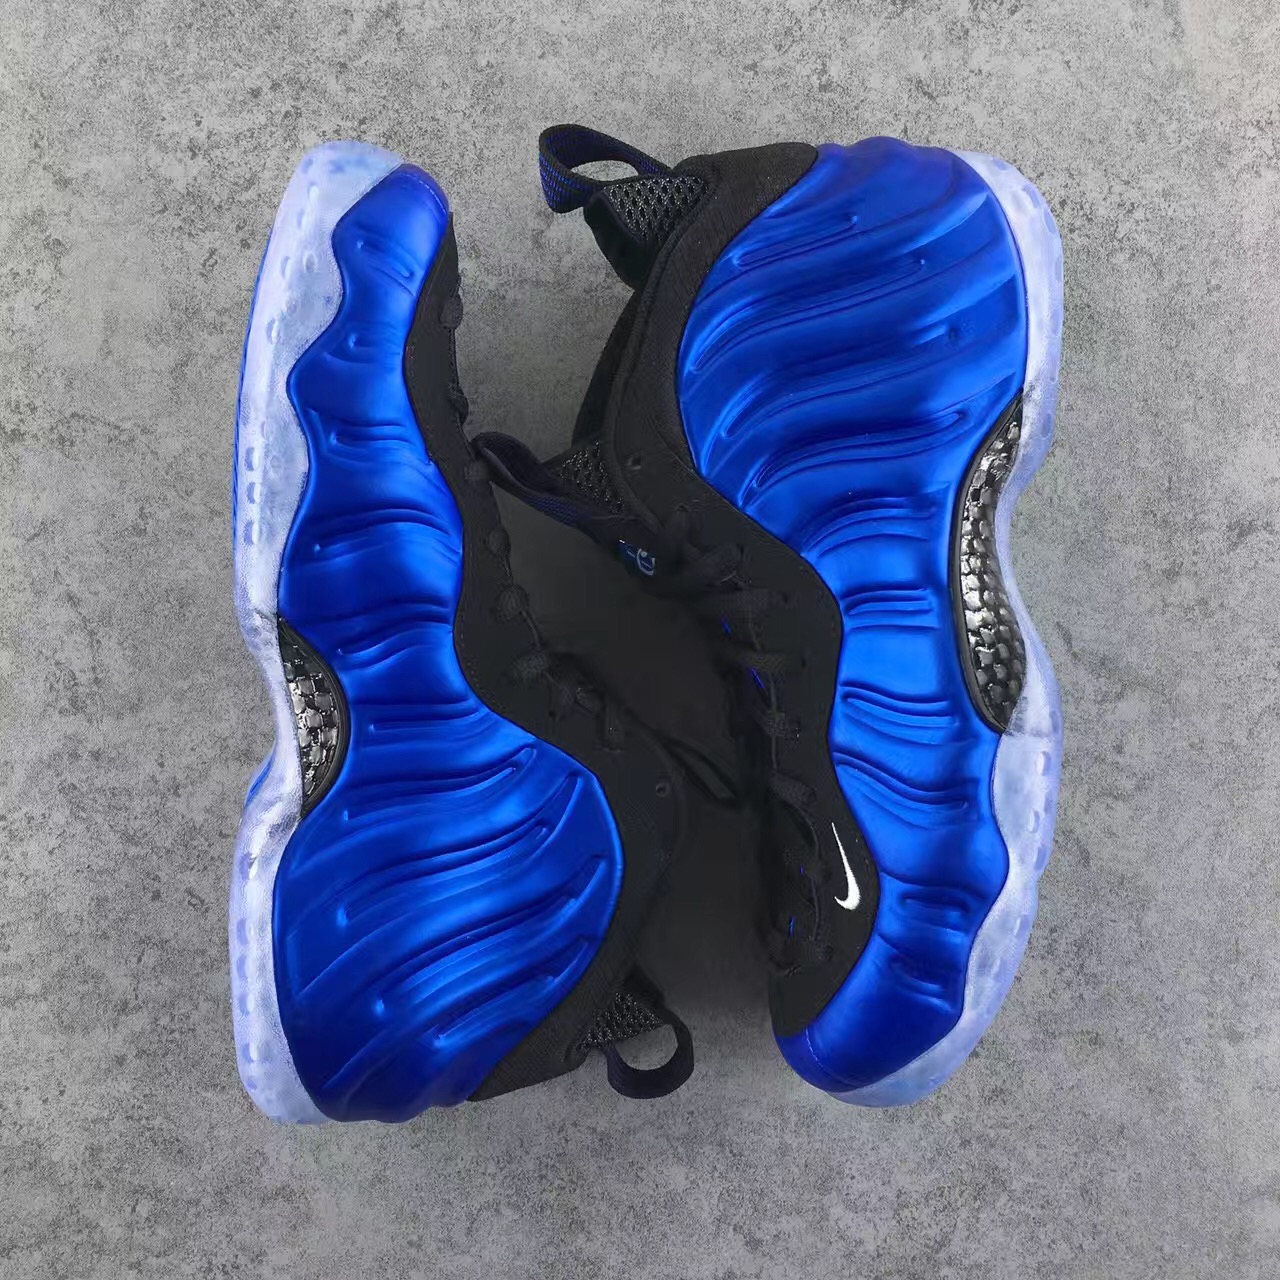 Authentic Nike Foamposite One Royal Blue